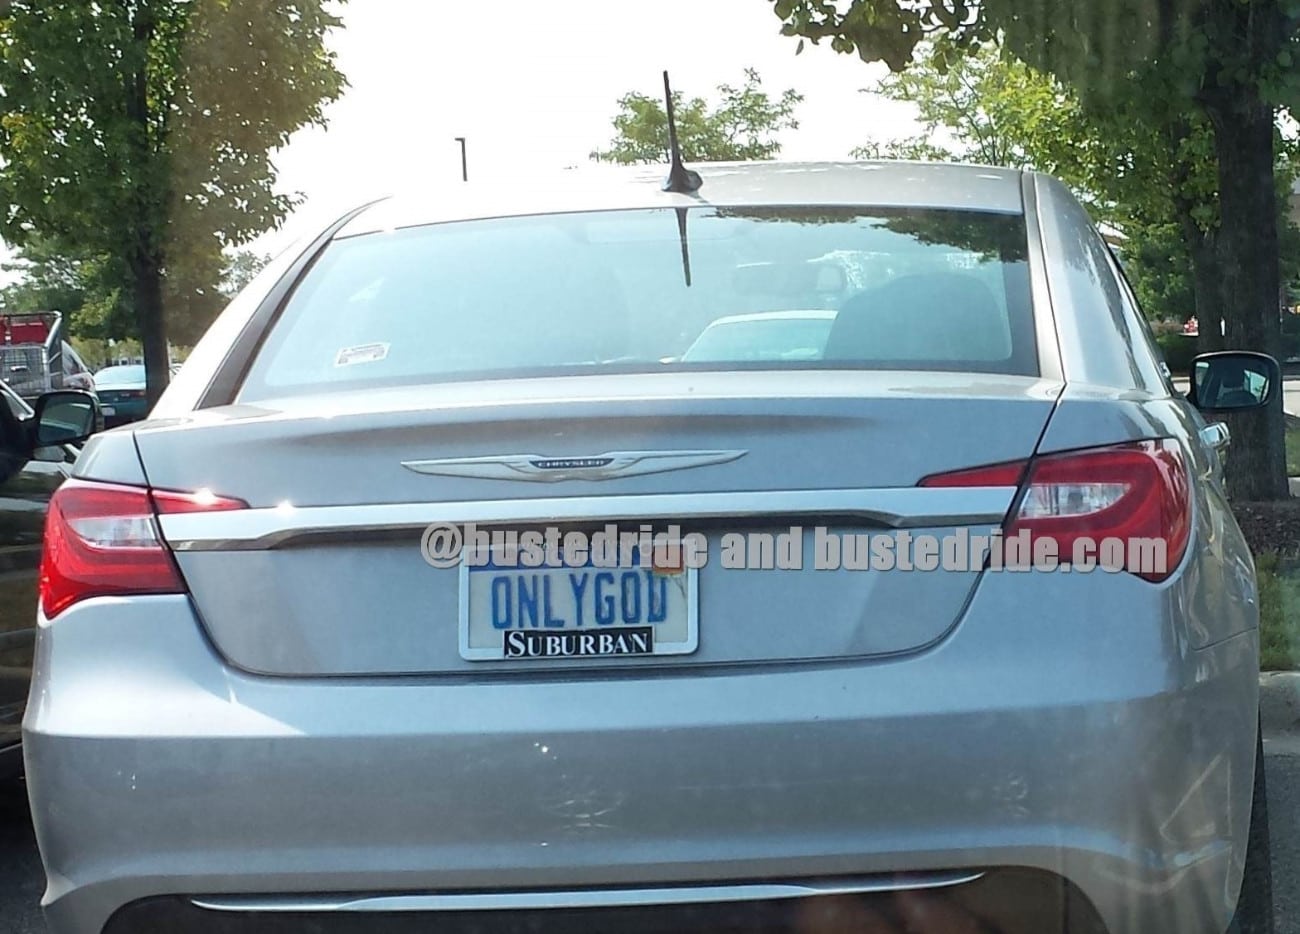 ONLYGOD - Vanity License Plate by Busted Ride